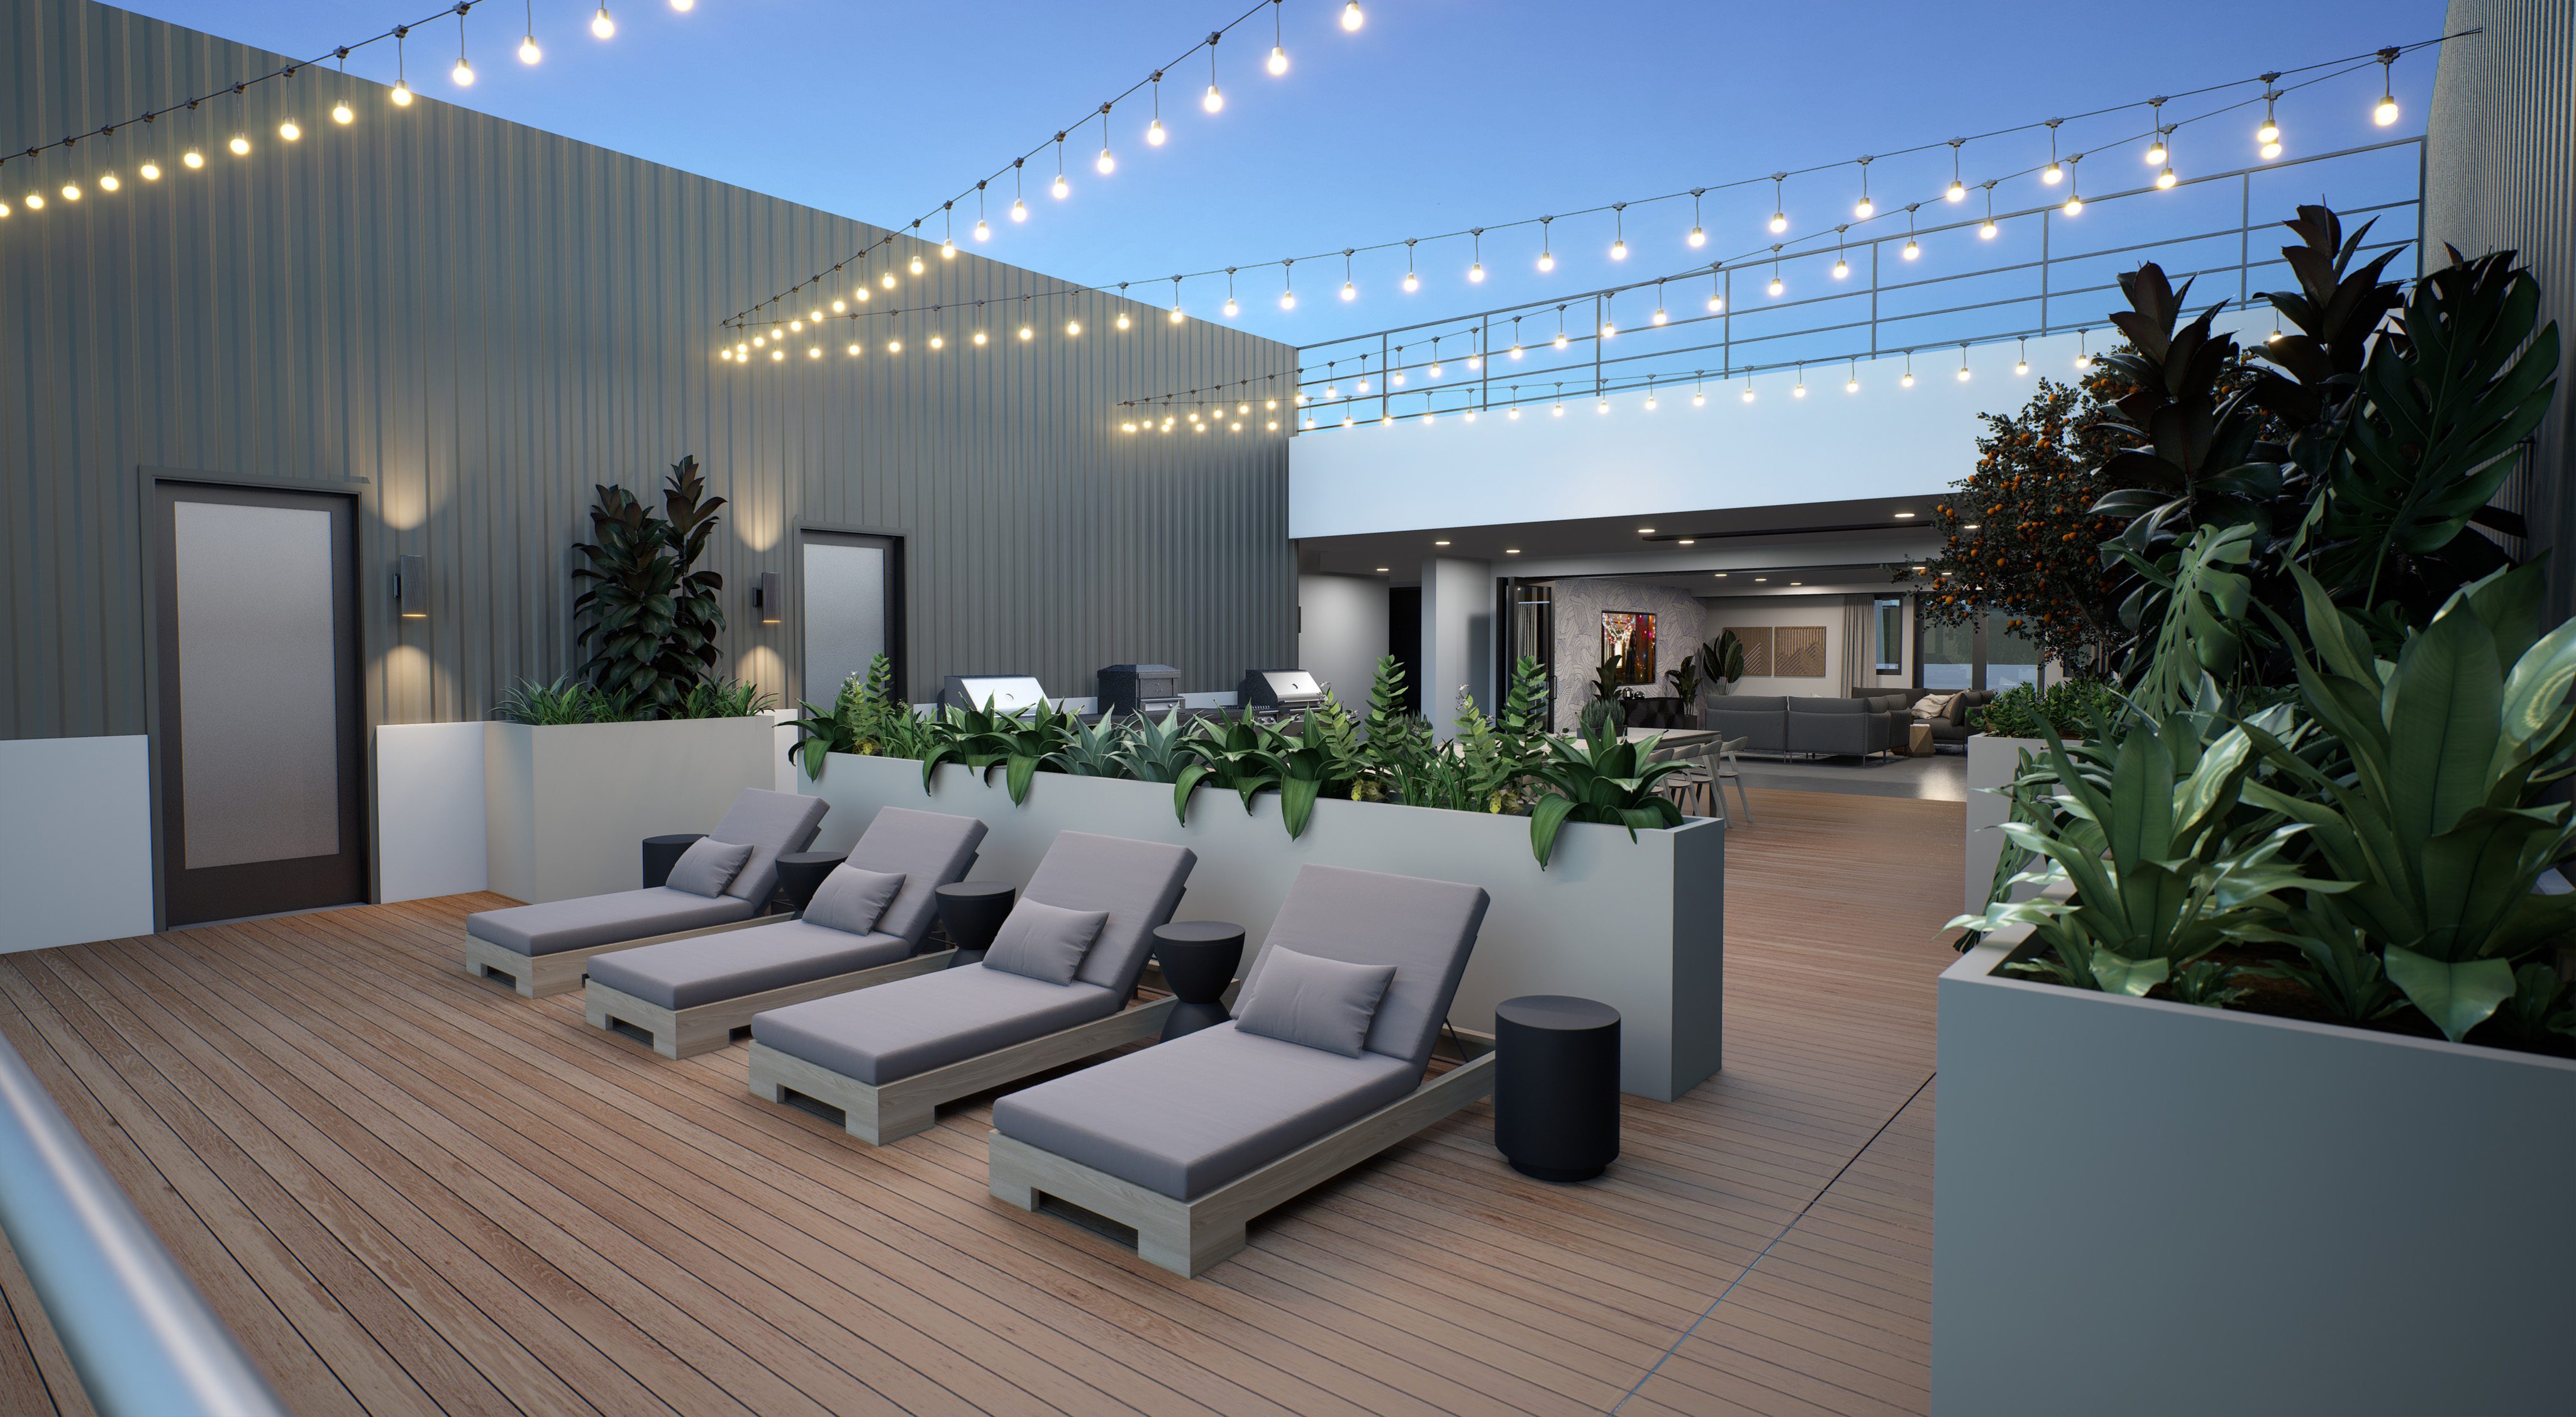 Gray lounge chairs on outdoor patio with greenery and string lights above with outdoor grills behind